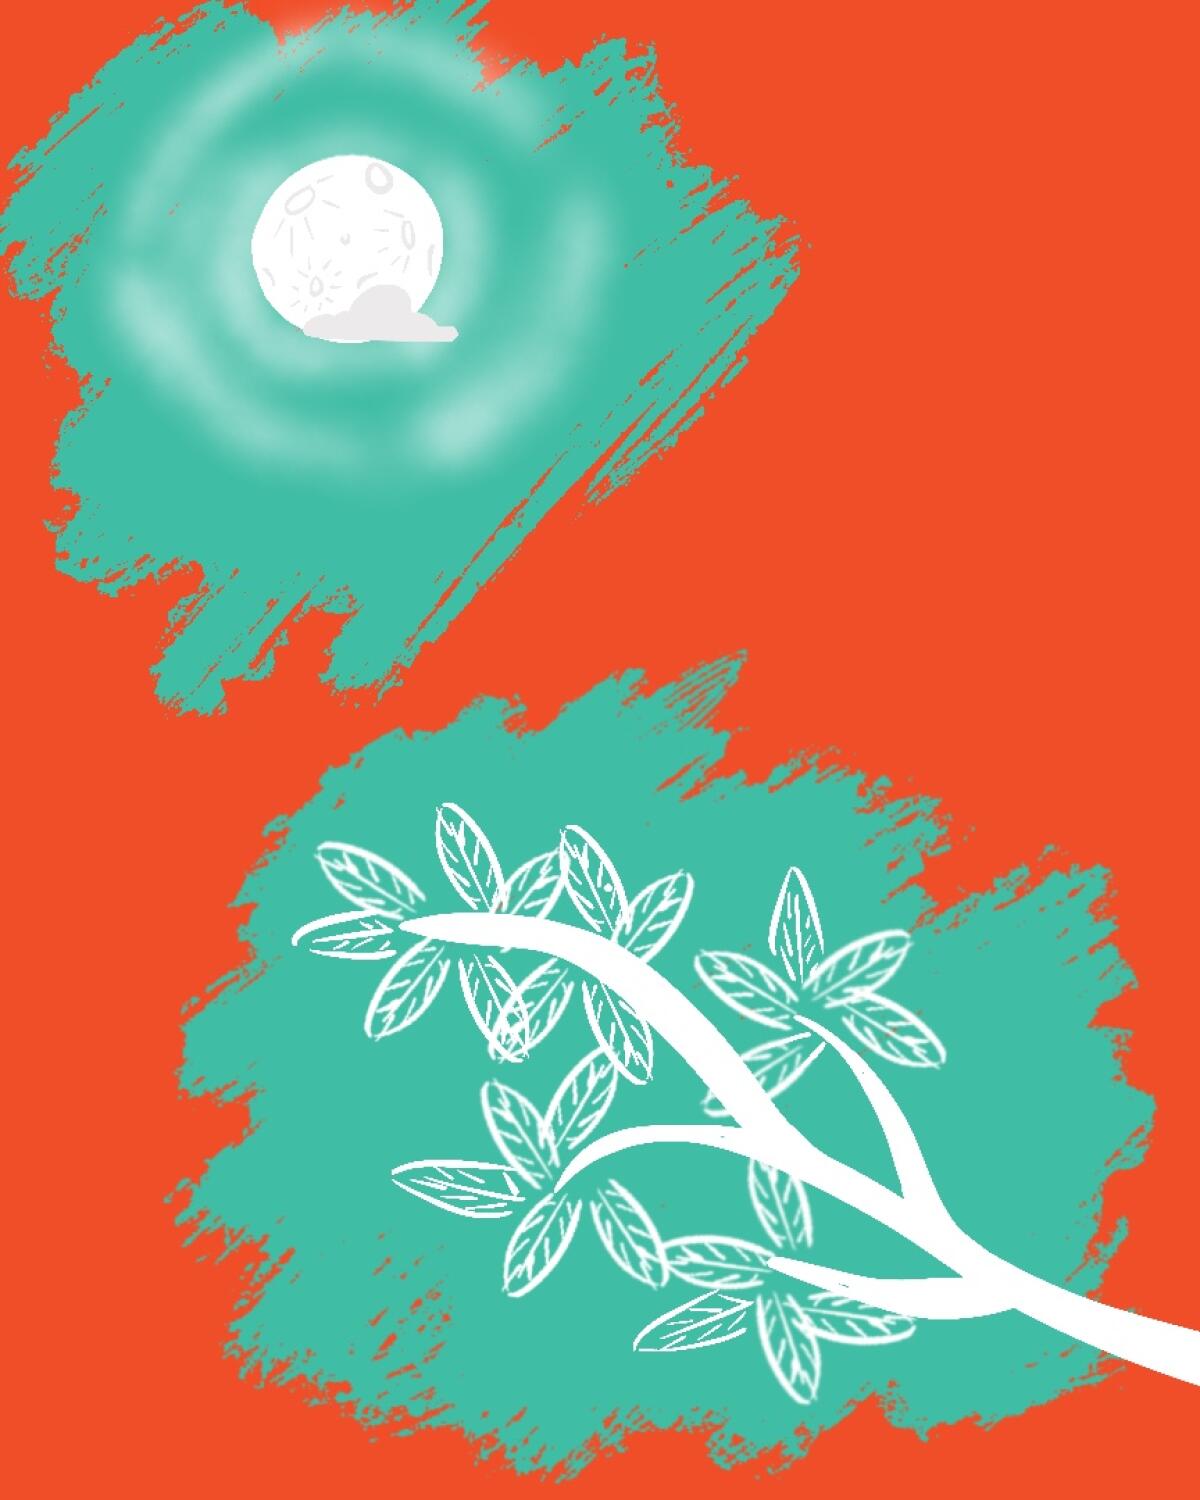 Illustration of the moon and a tree.